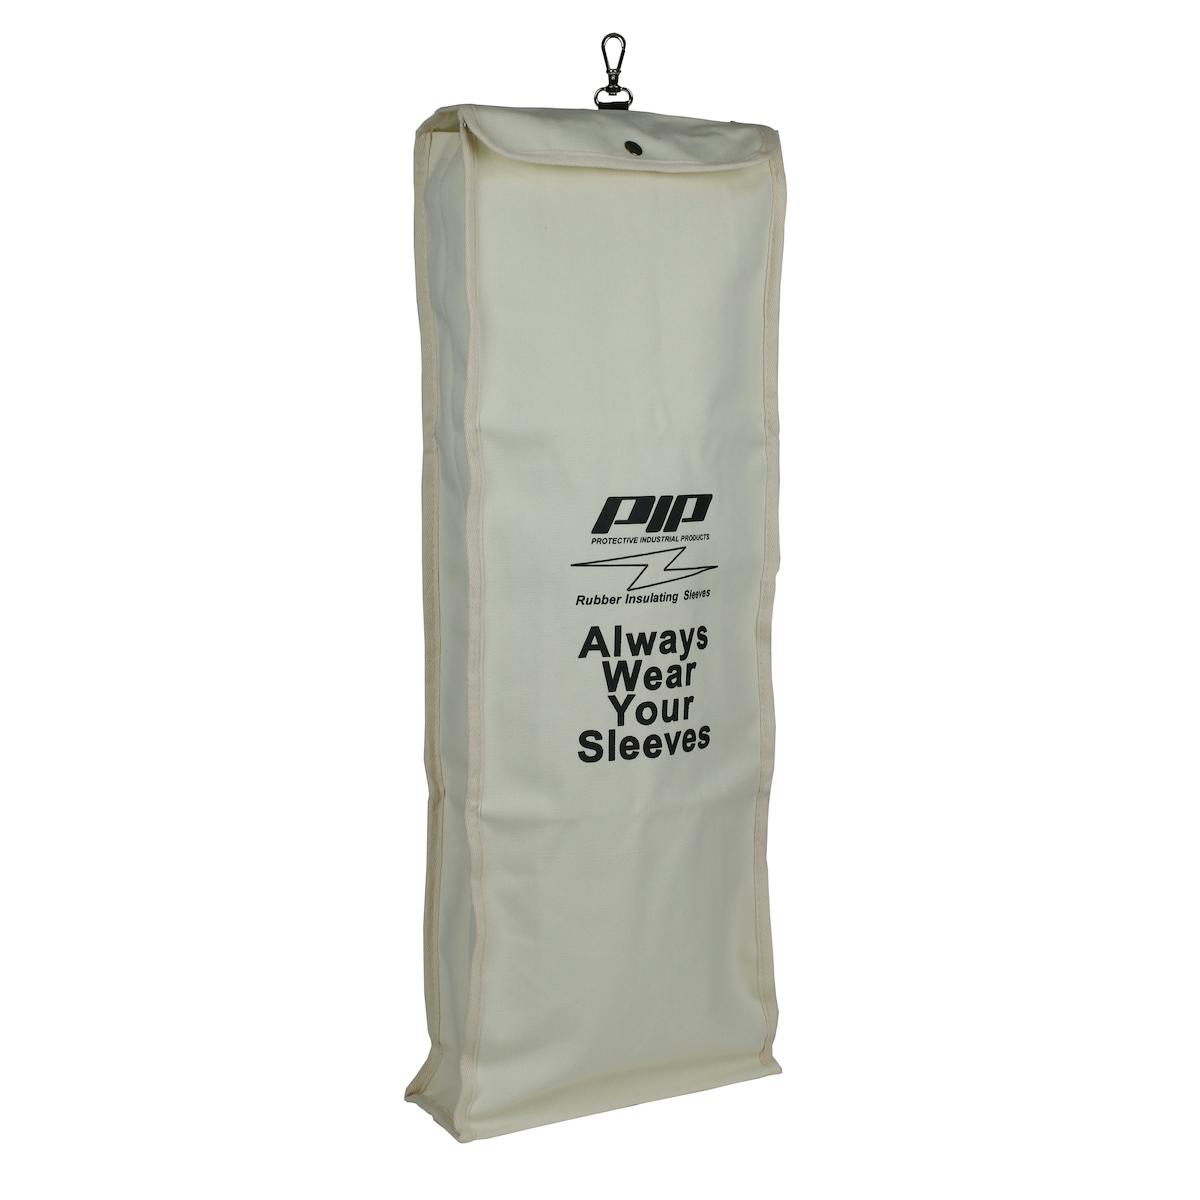 Canvas bag for 30-inch Rubber Insulating Sleeve, Natural (148-6030) - OS_0